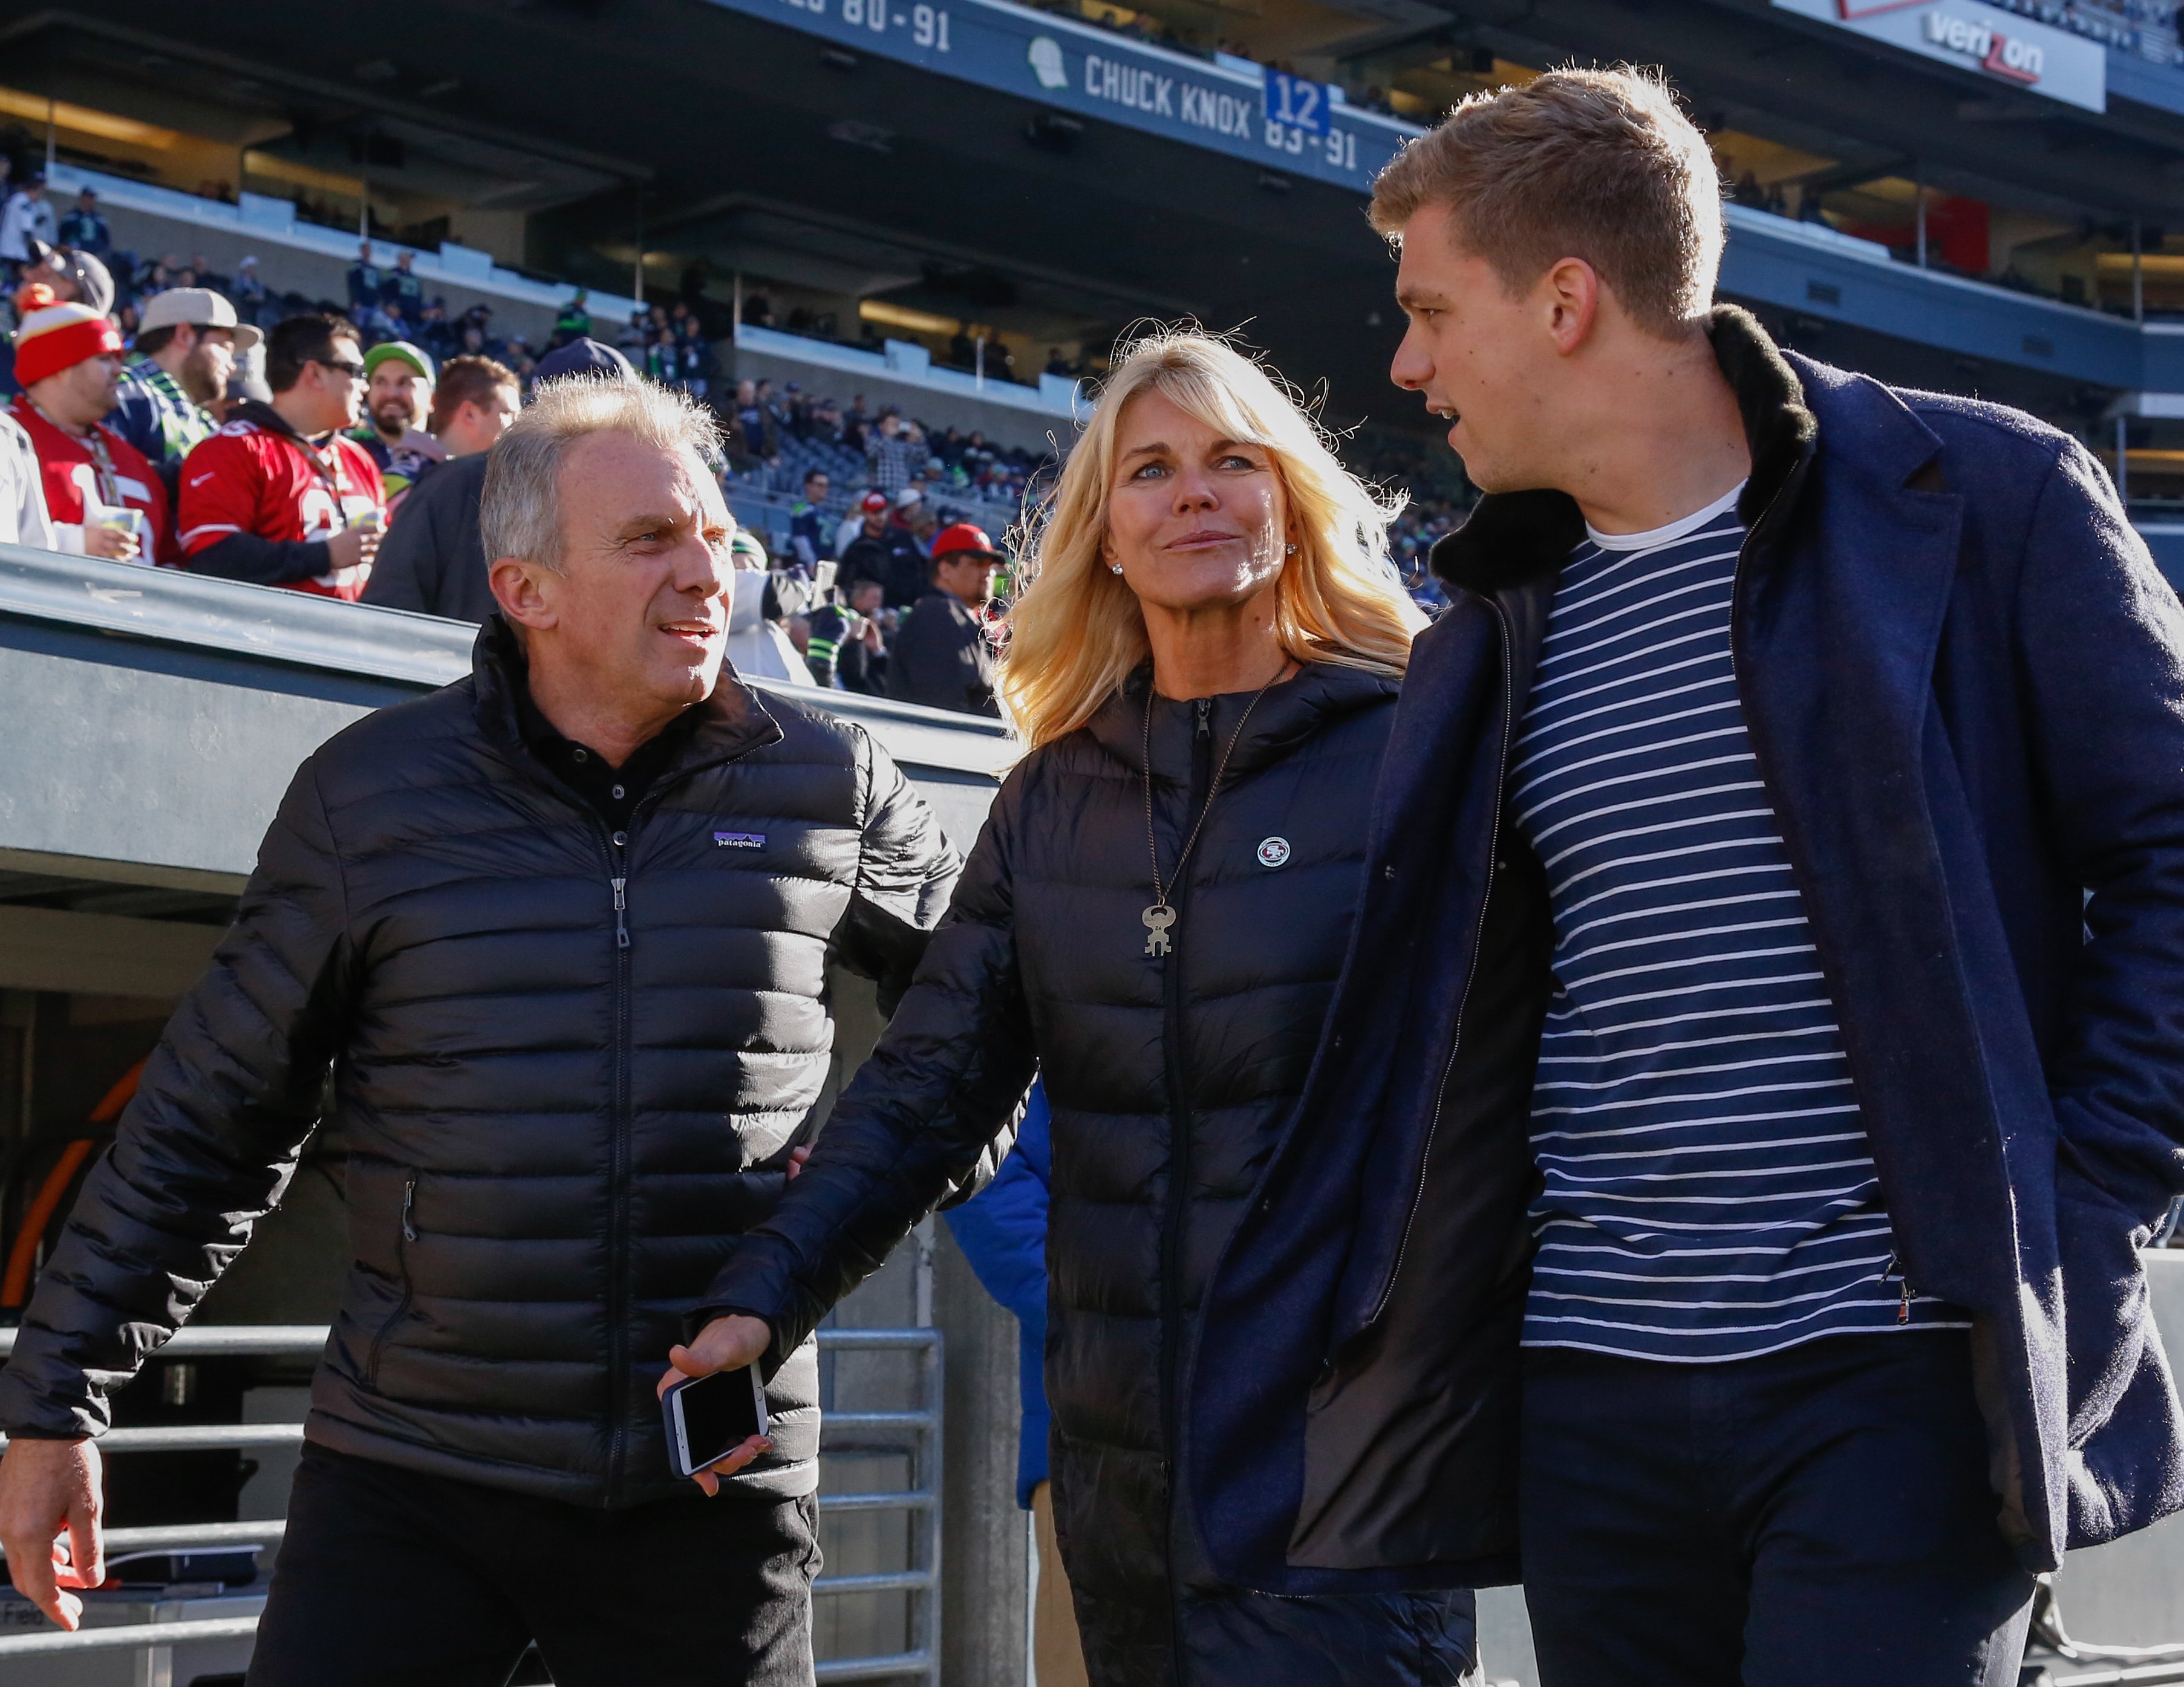 Joe Montana, his wife Jennifer, and their son Nick walking the sidelines before a game in Seattle | Source: Getty Images